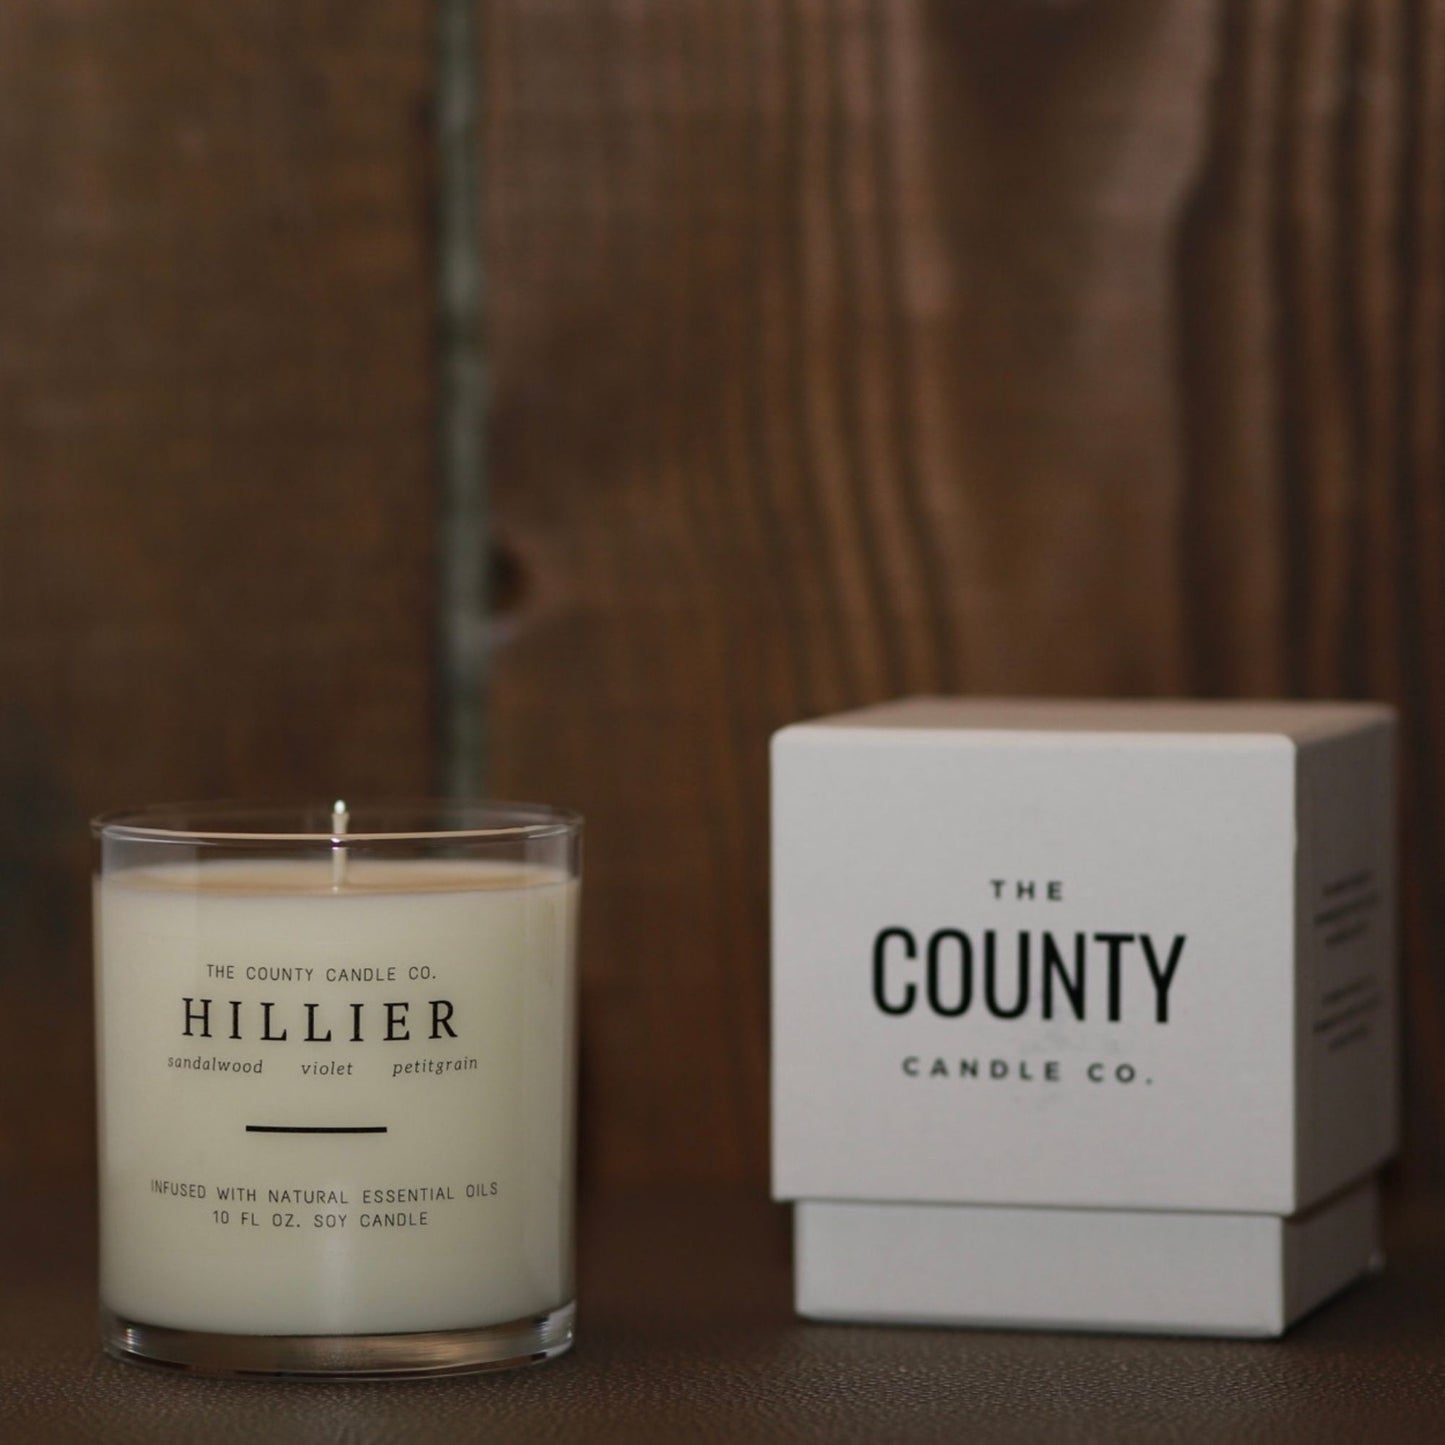 Hillier | The County Candle Co.